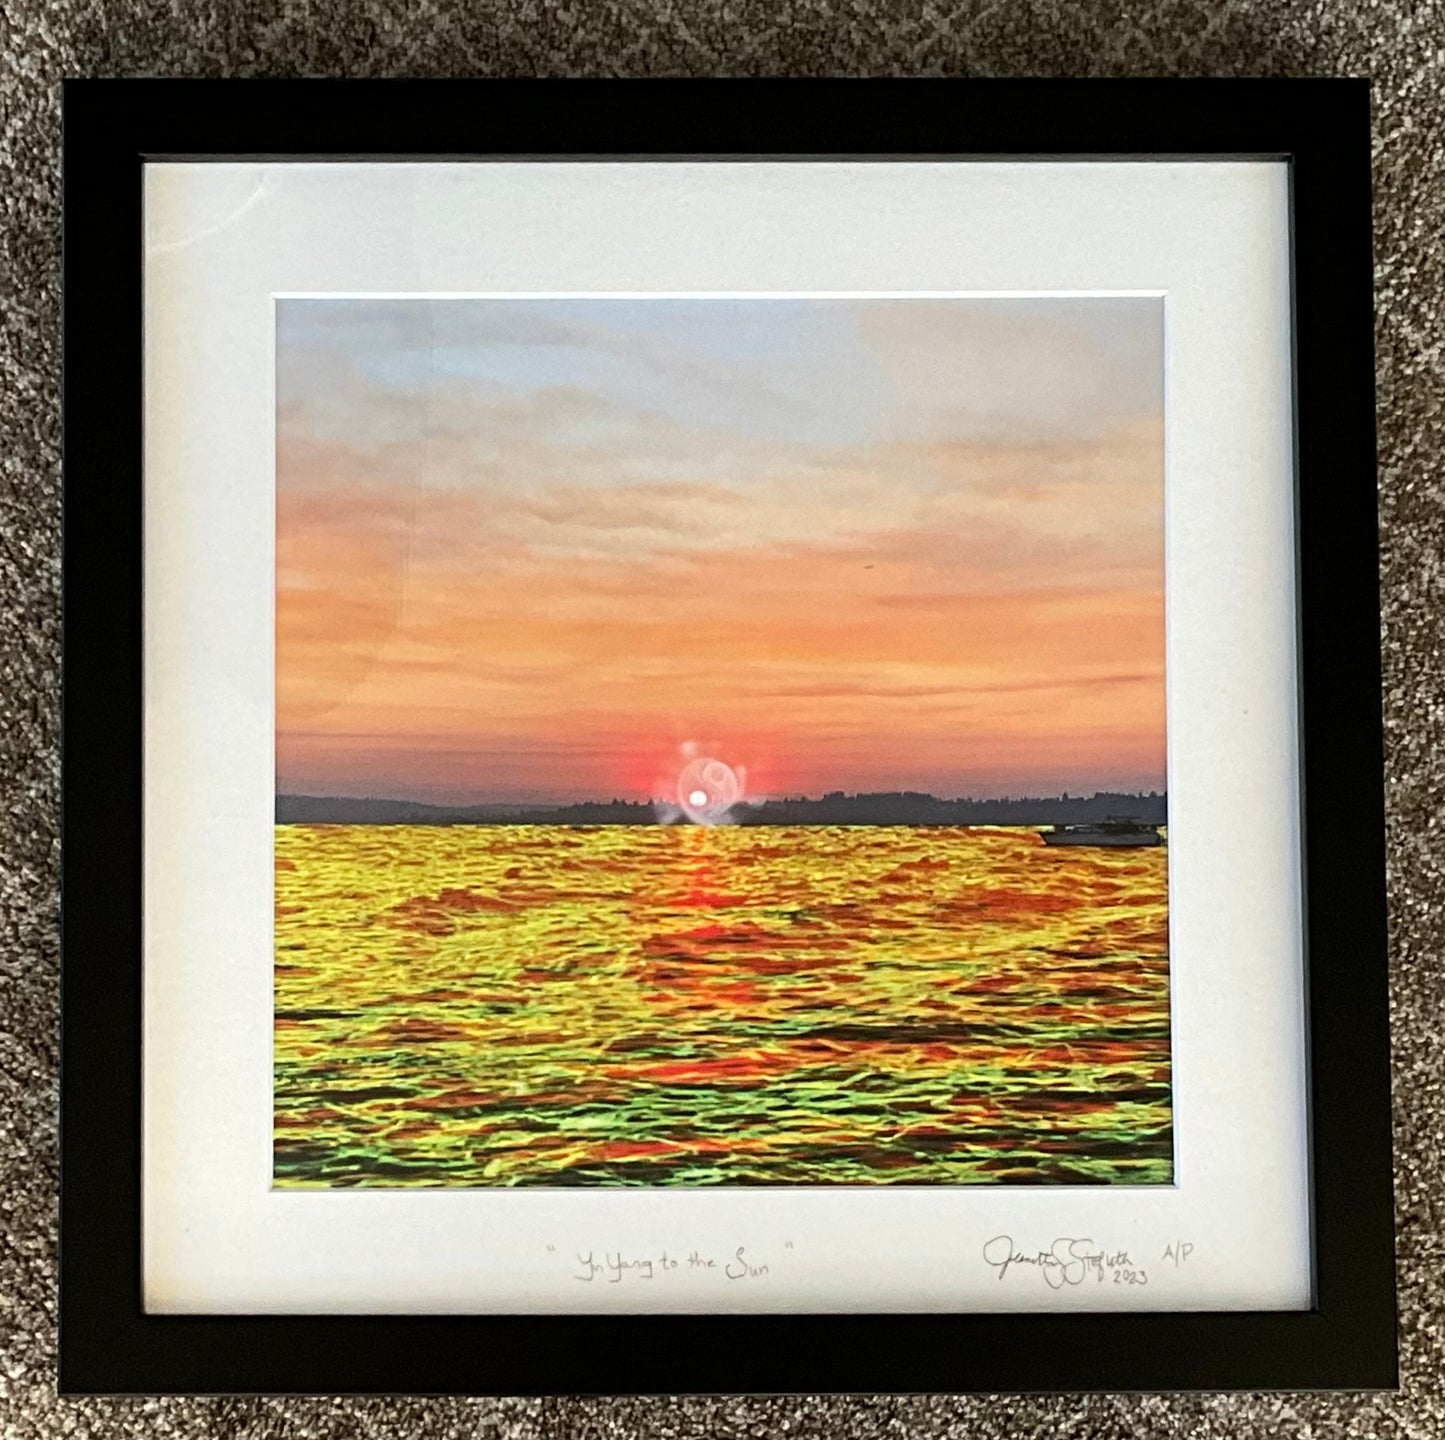 “Yin Yang to the Sun (Son)” - 16”x16” A/P Print 2/2 Professionally Framed